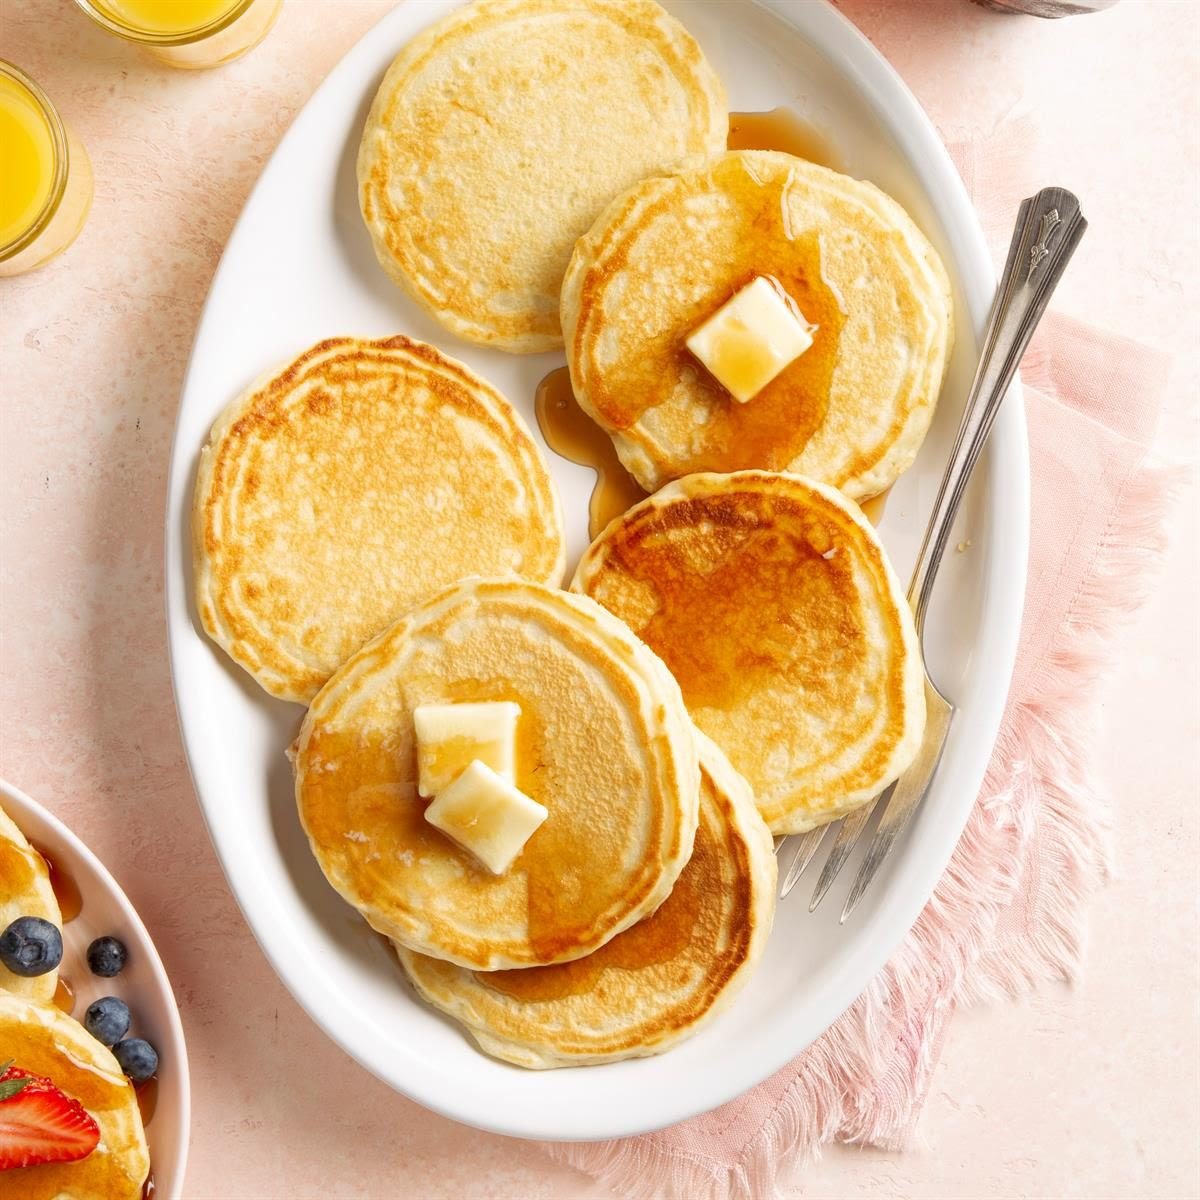 16 Breakfast Ideas for People with Type 2 Diabetes
tasteofhome.com/collection/bre…
@tasteofhome